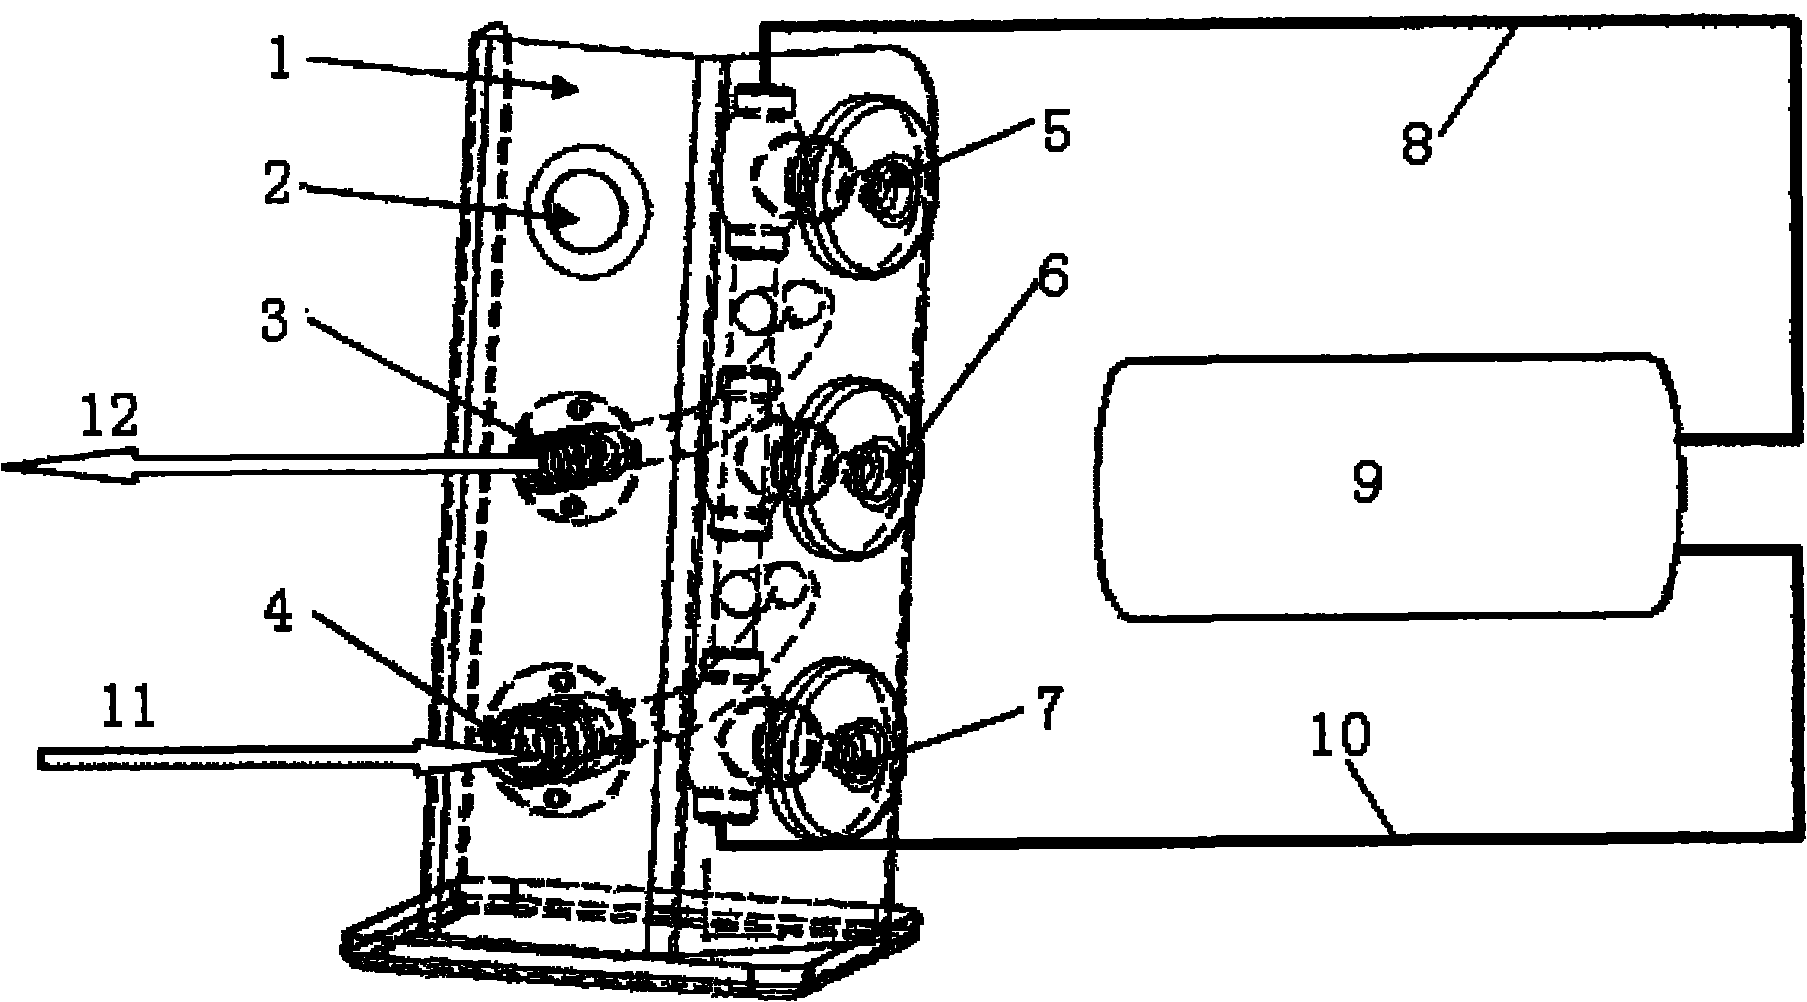 Fuel injection mechanism of vehicle-mounted gas bottle of liquefied natural gas vehicle